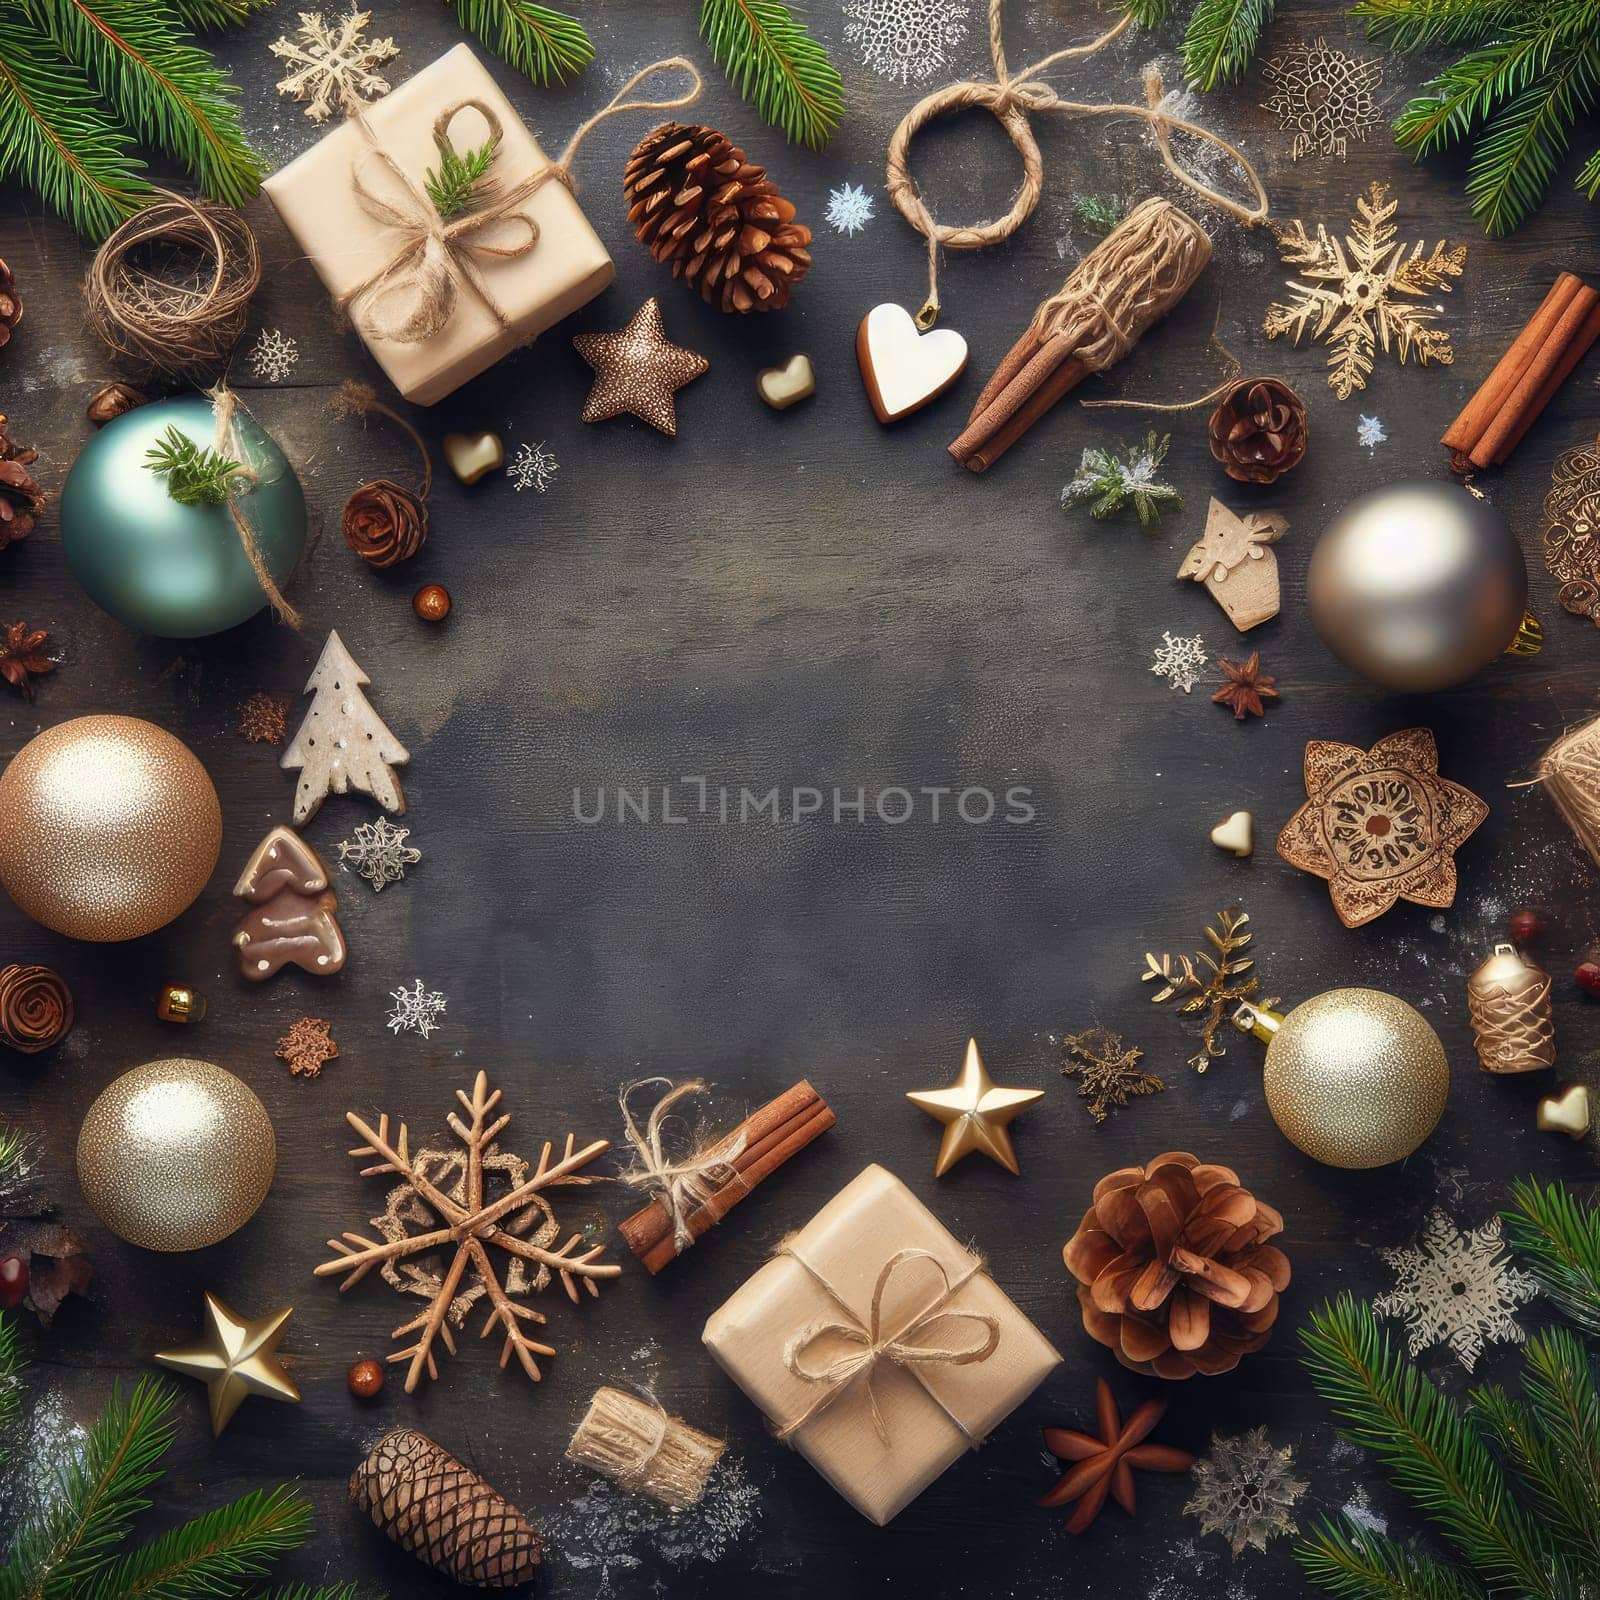 Christmas background with fir twigs, red berries, cones and Xmas lights on dark abstract background with plenty of text space.